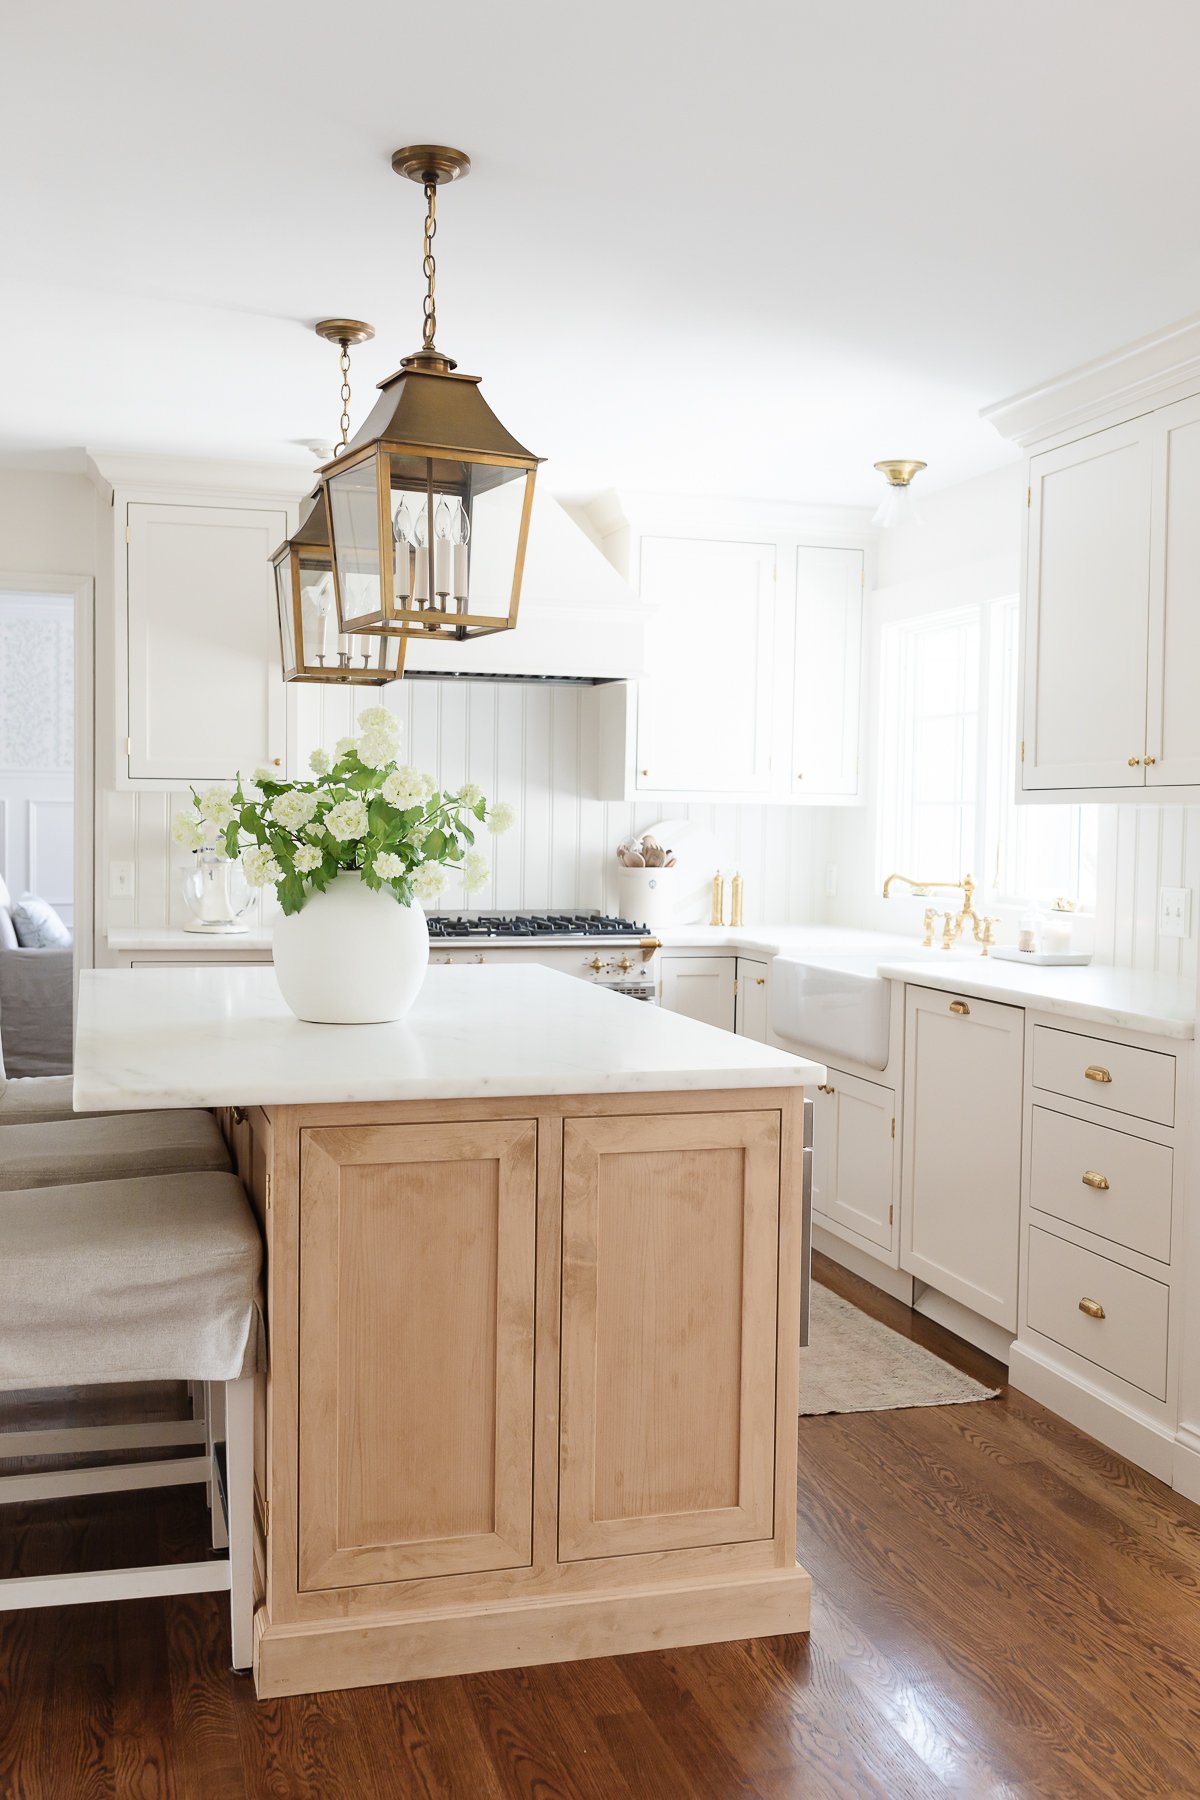 A cream kitchen with inset cabinets and a wood island.